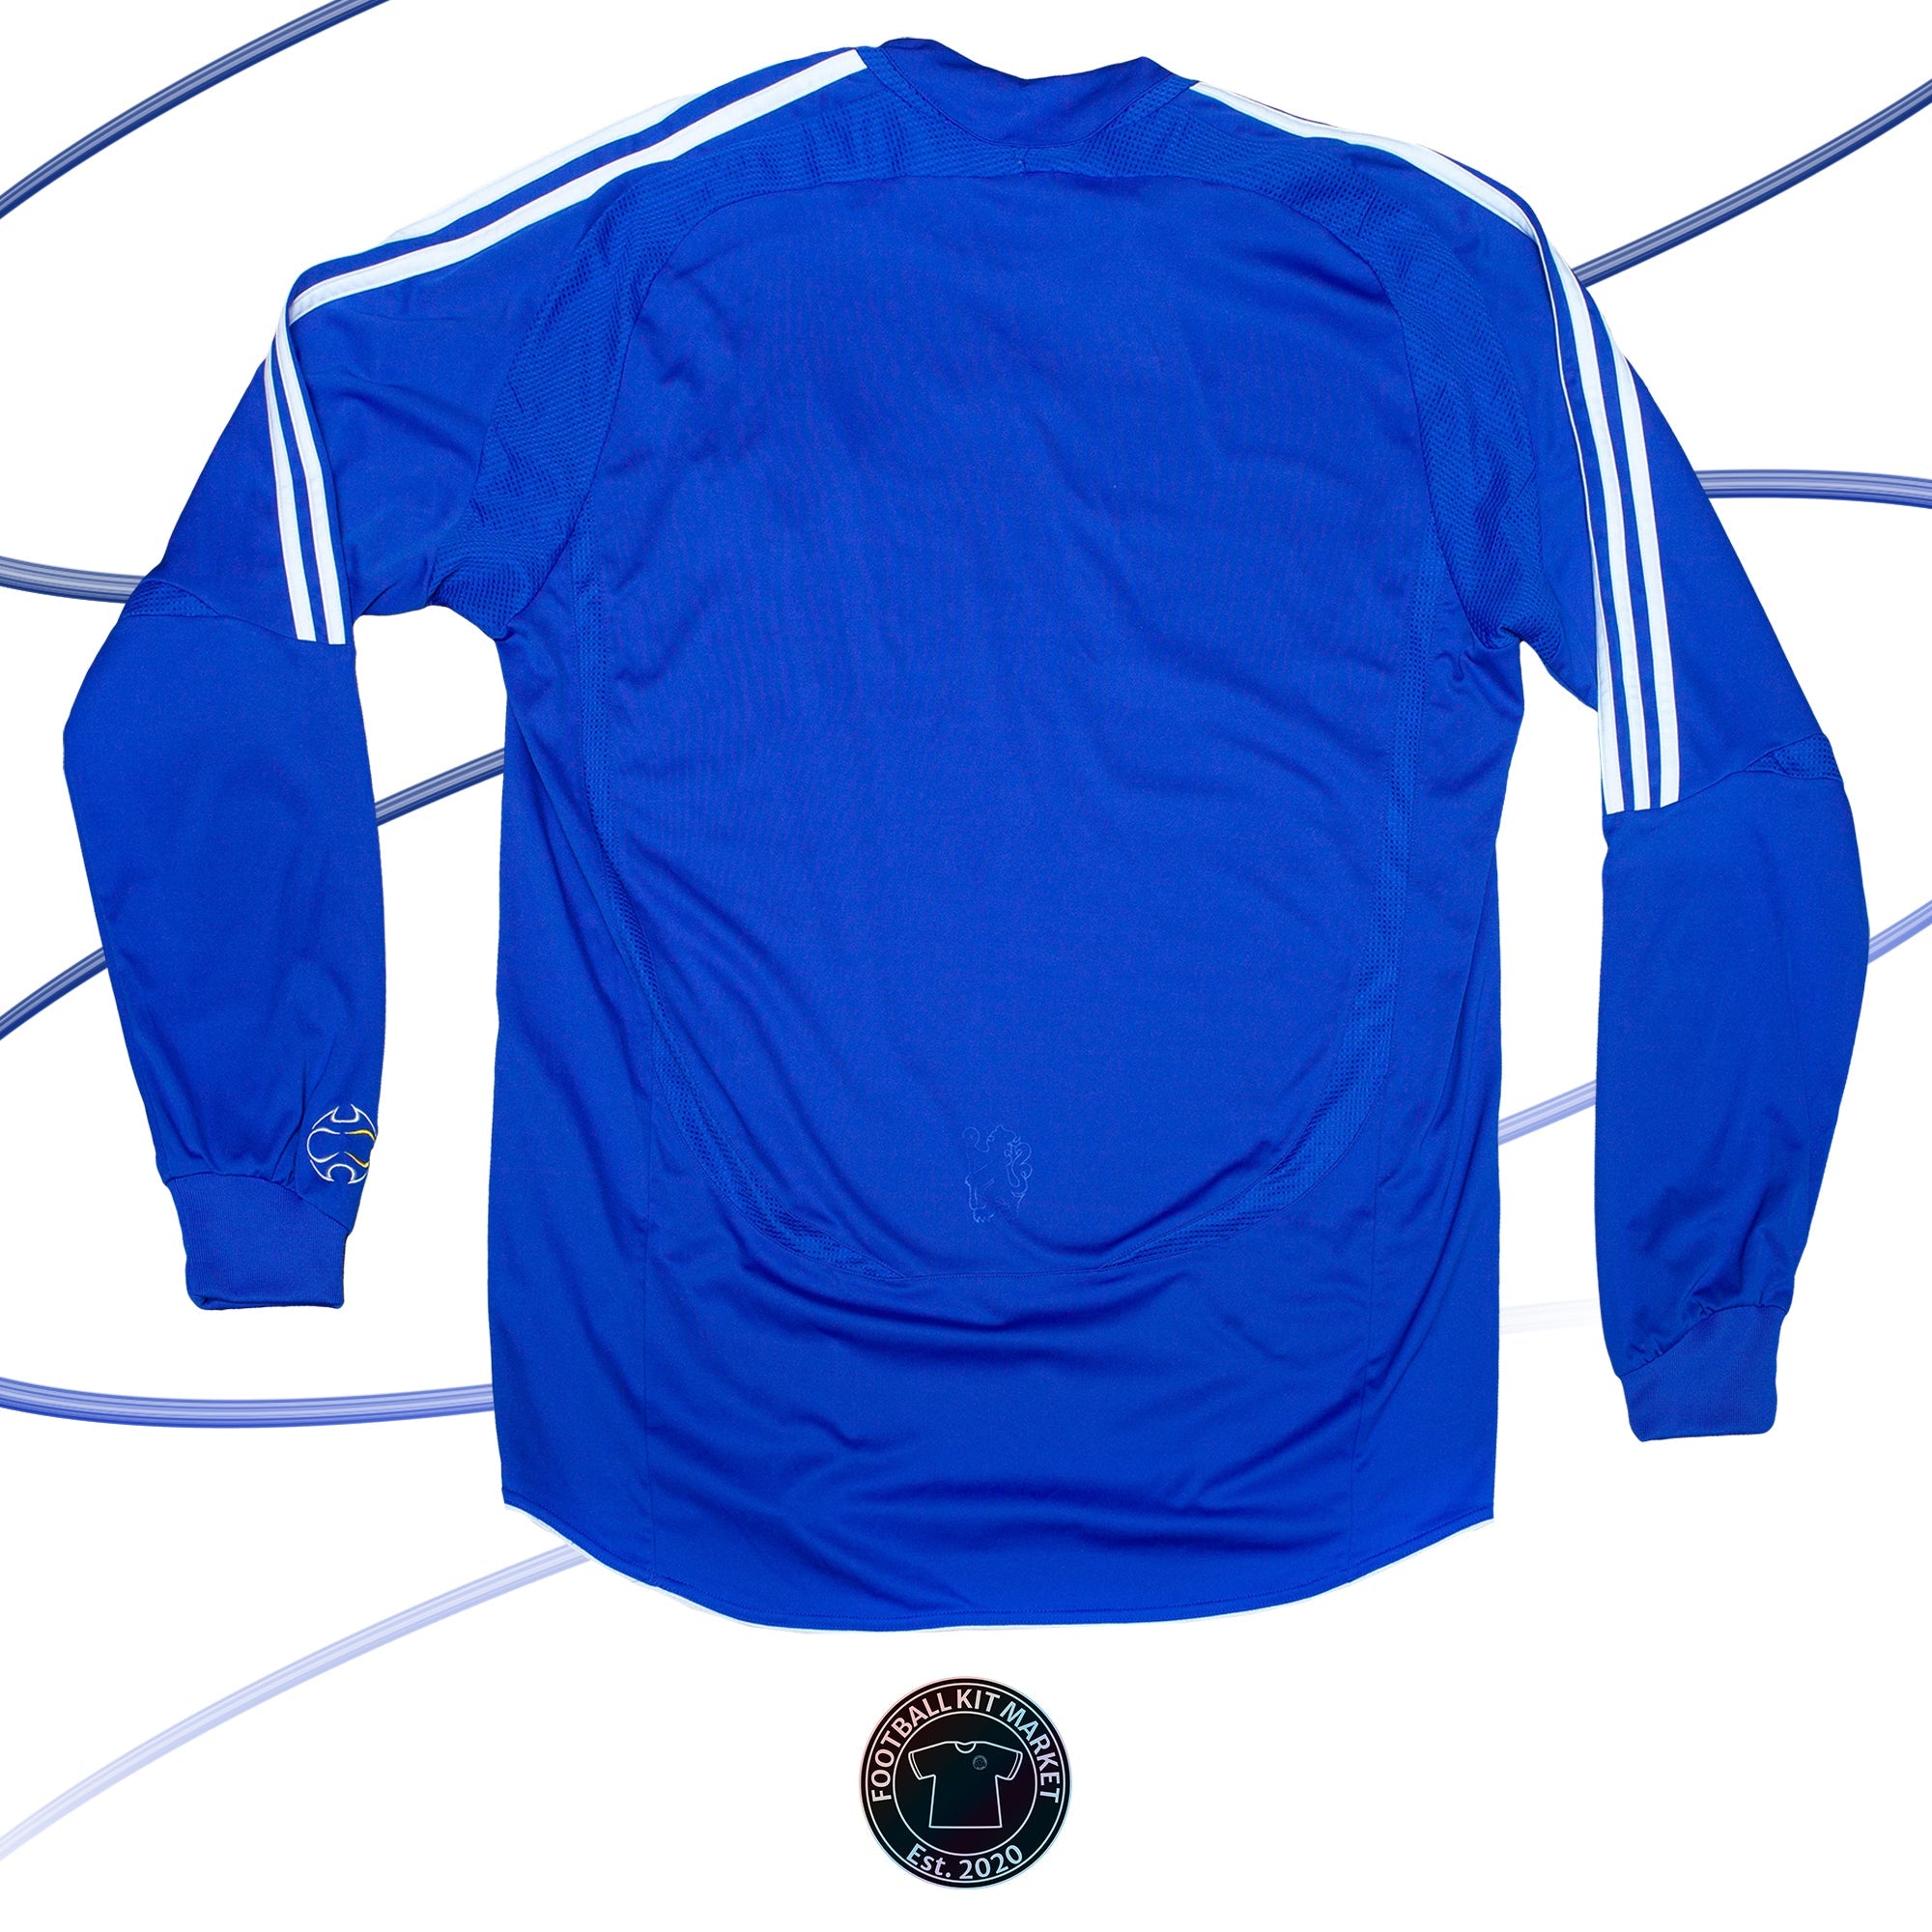 Genuine CHELSEA Home Shirt (2006-2008) - ADIDAS (XL) - Product Image from Football Kit Market